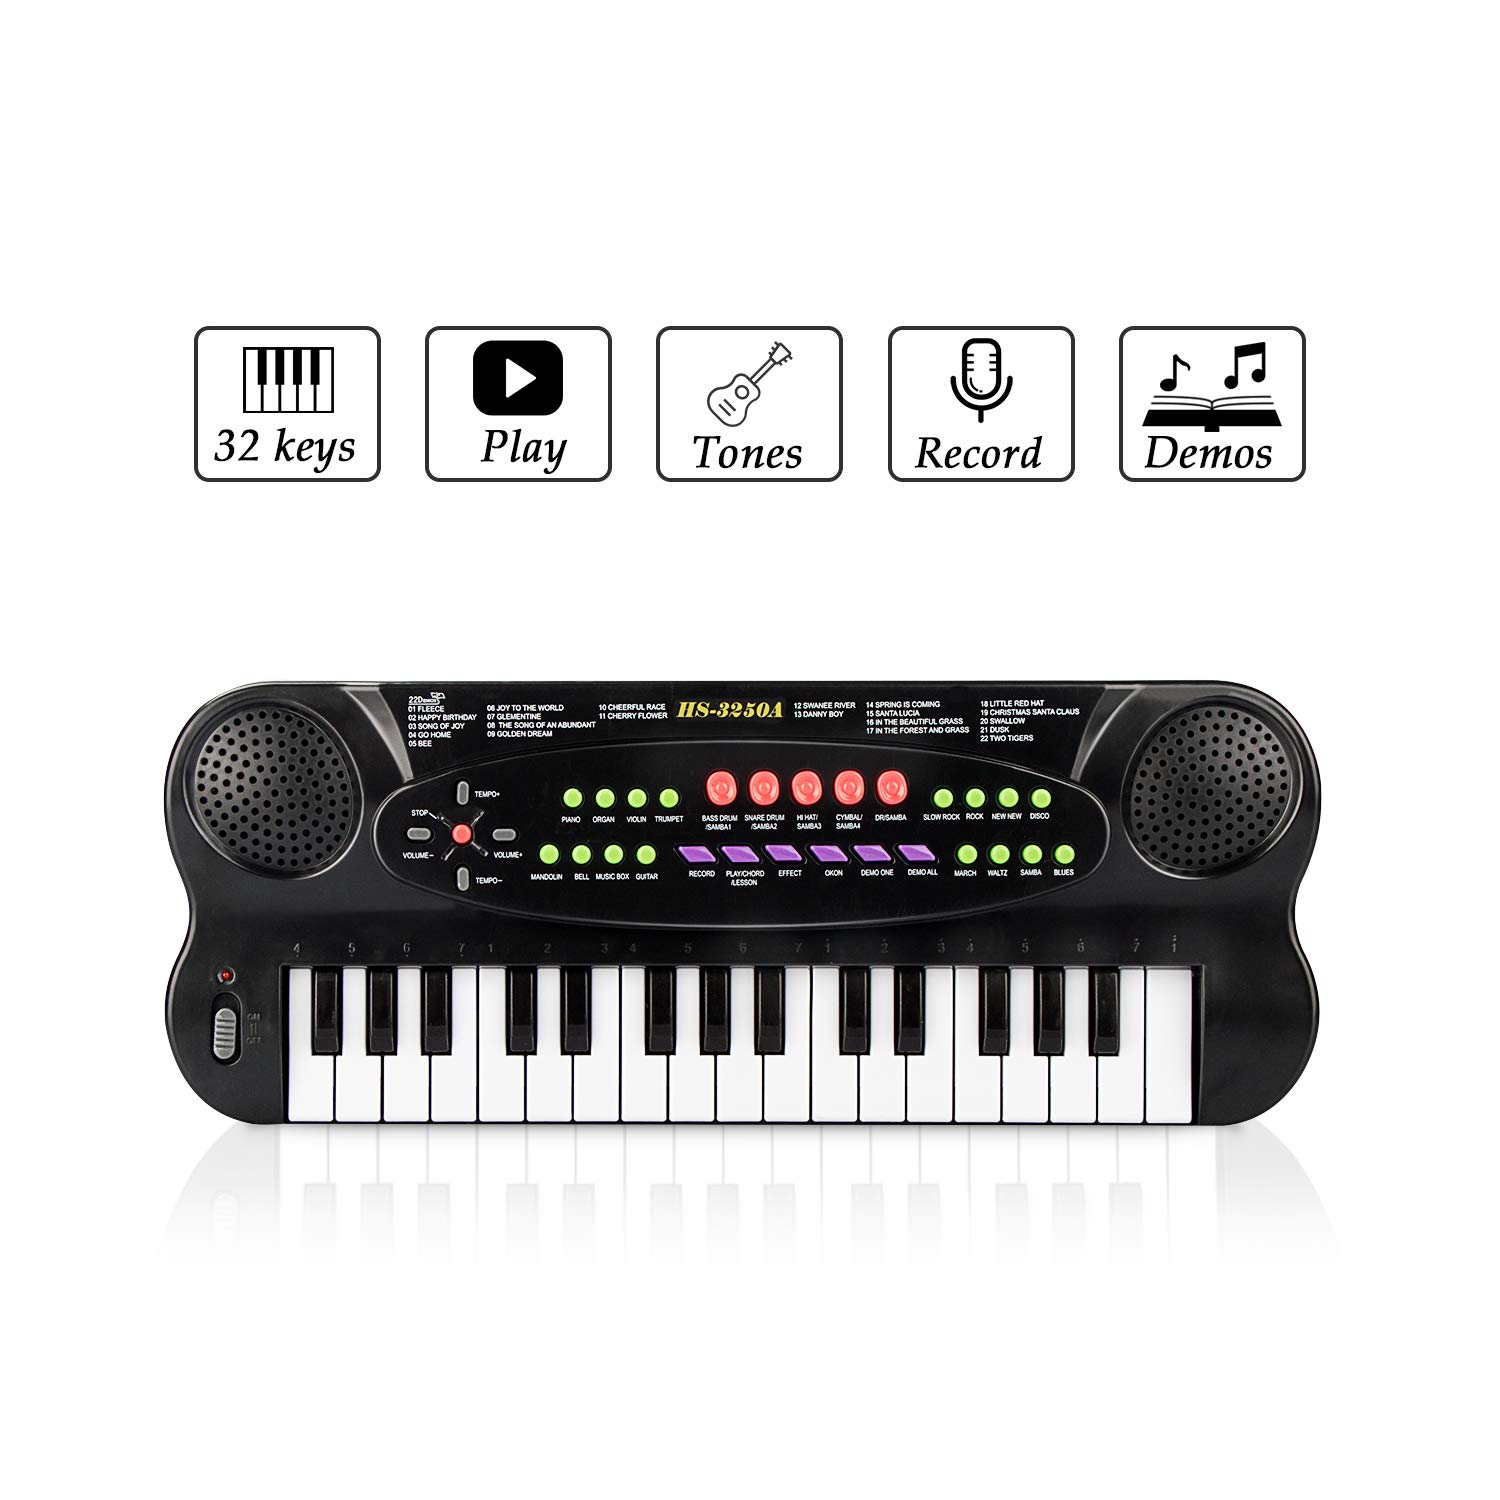 JINRUCHE Piano Keyboard Toy for Kids 32 Keys Multifunctional Toy Piano with Microphone for Baby Birthday Gift Toy for 2-6 Year Old Toddlers (Black)